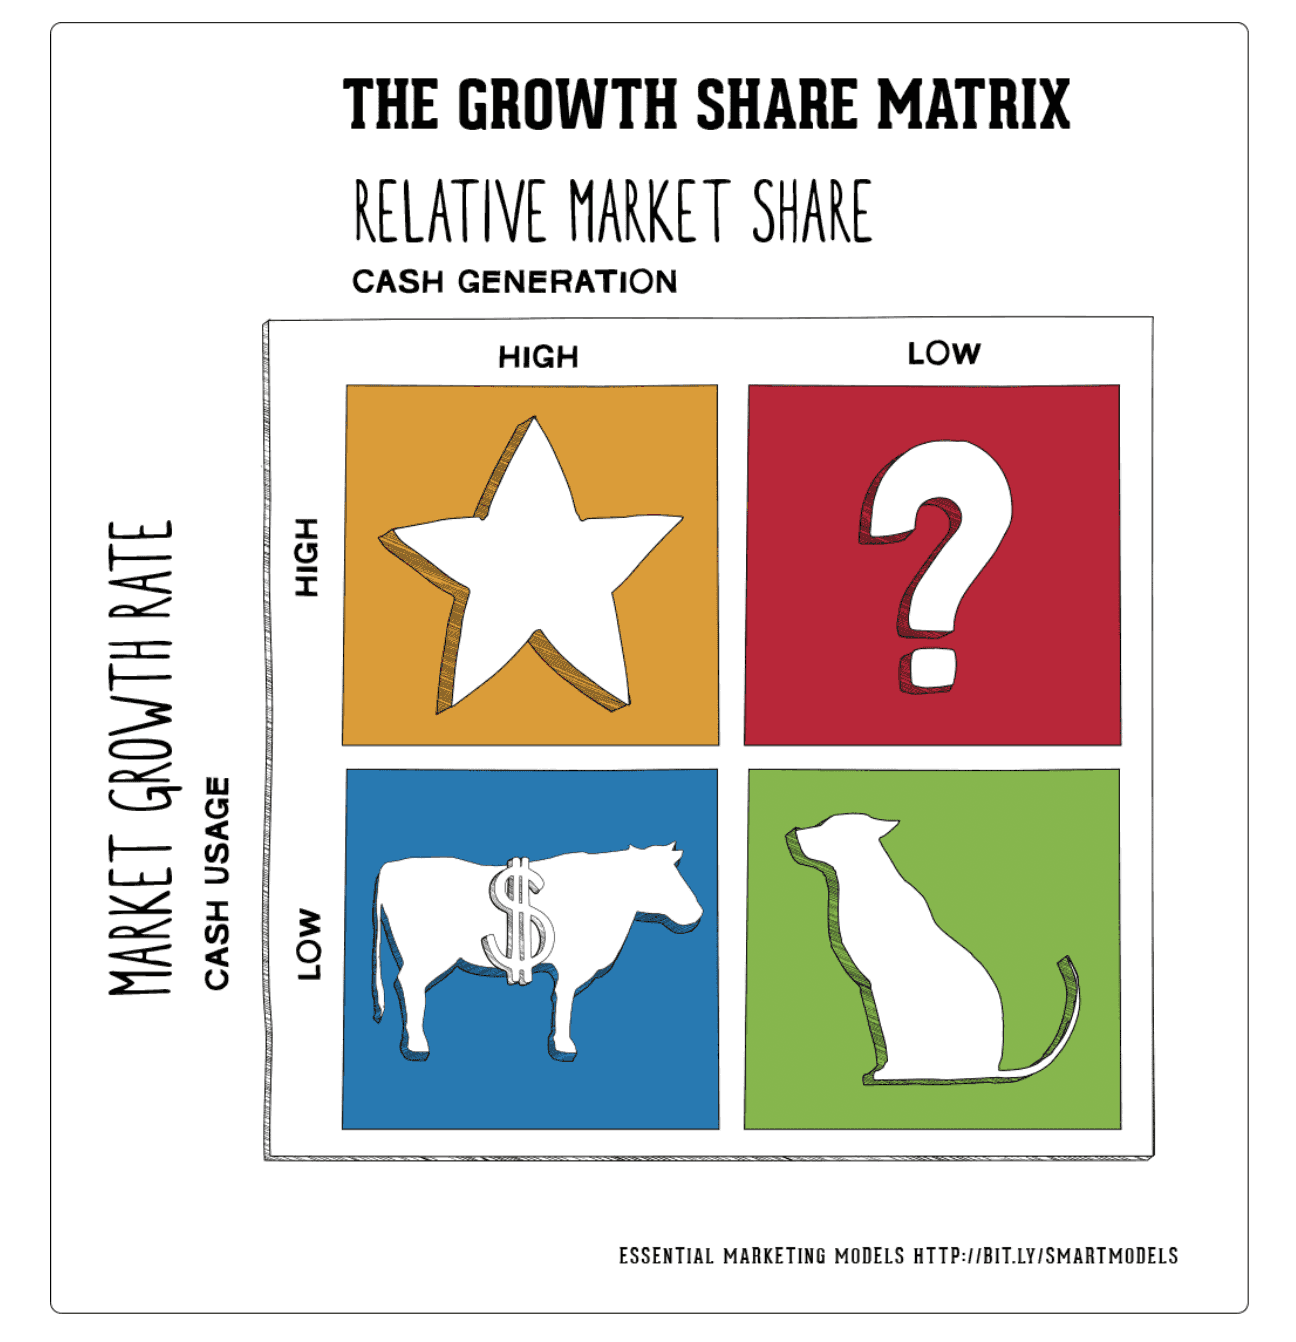 Image of the Growth-Share Matrix